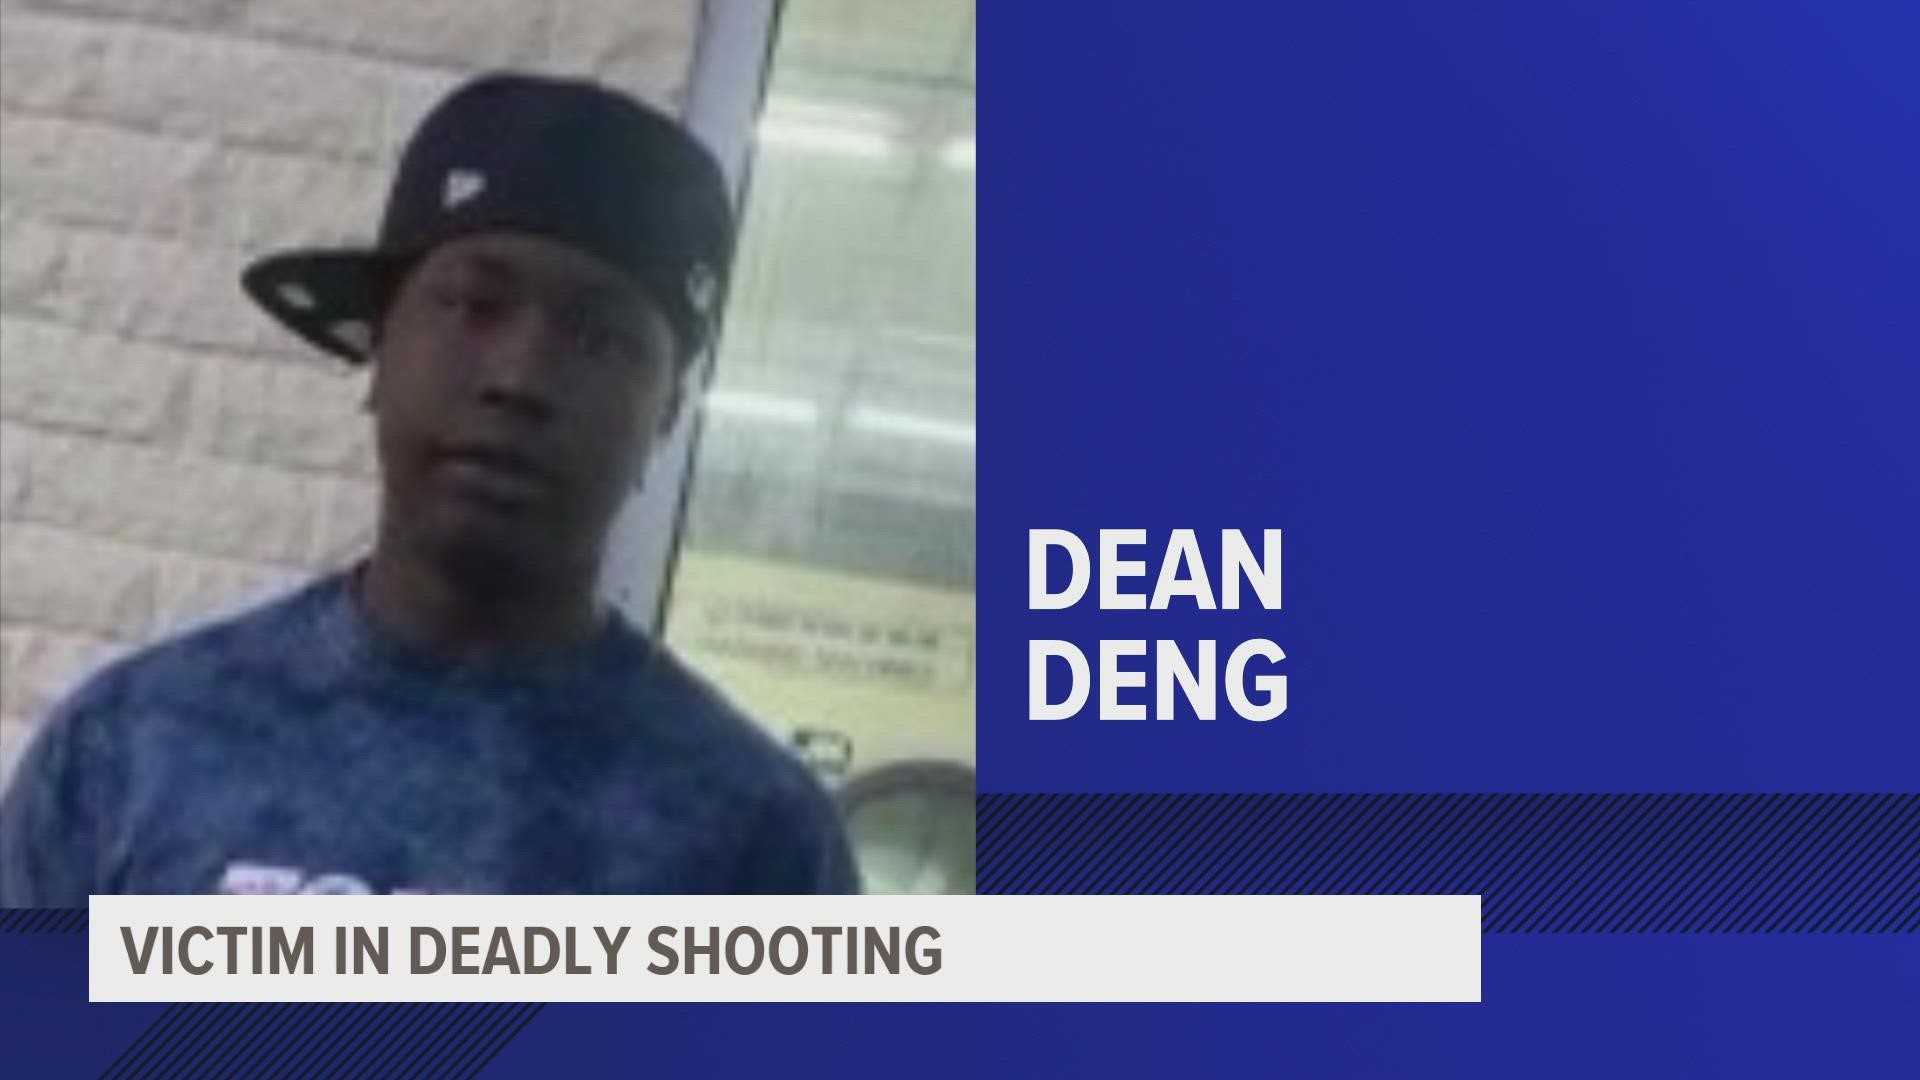 A 17-year-old faces a first-degree murder charge for allegedly shooting and killing Dean Deng, 18, on Nov. 14.